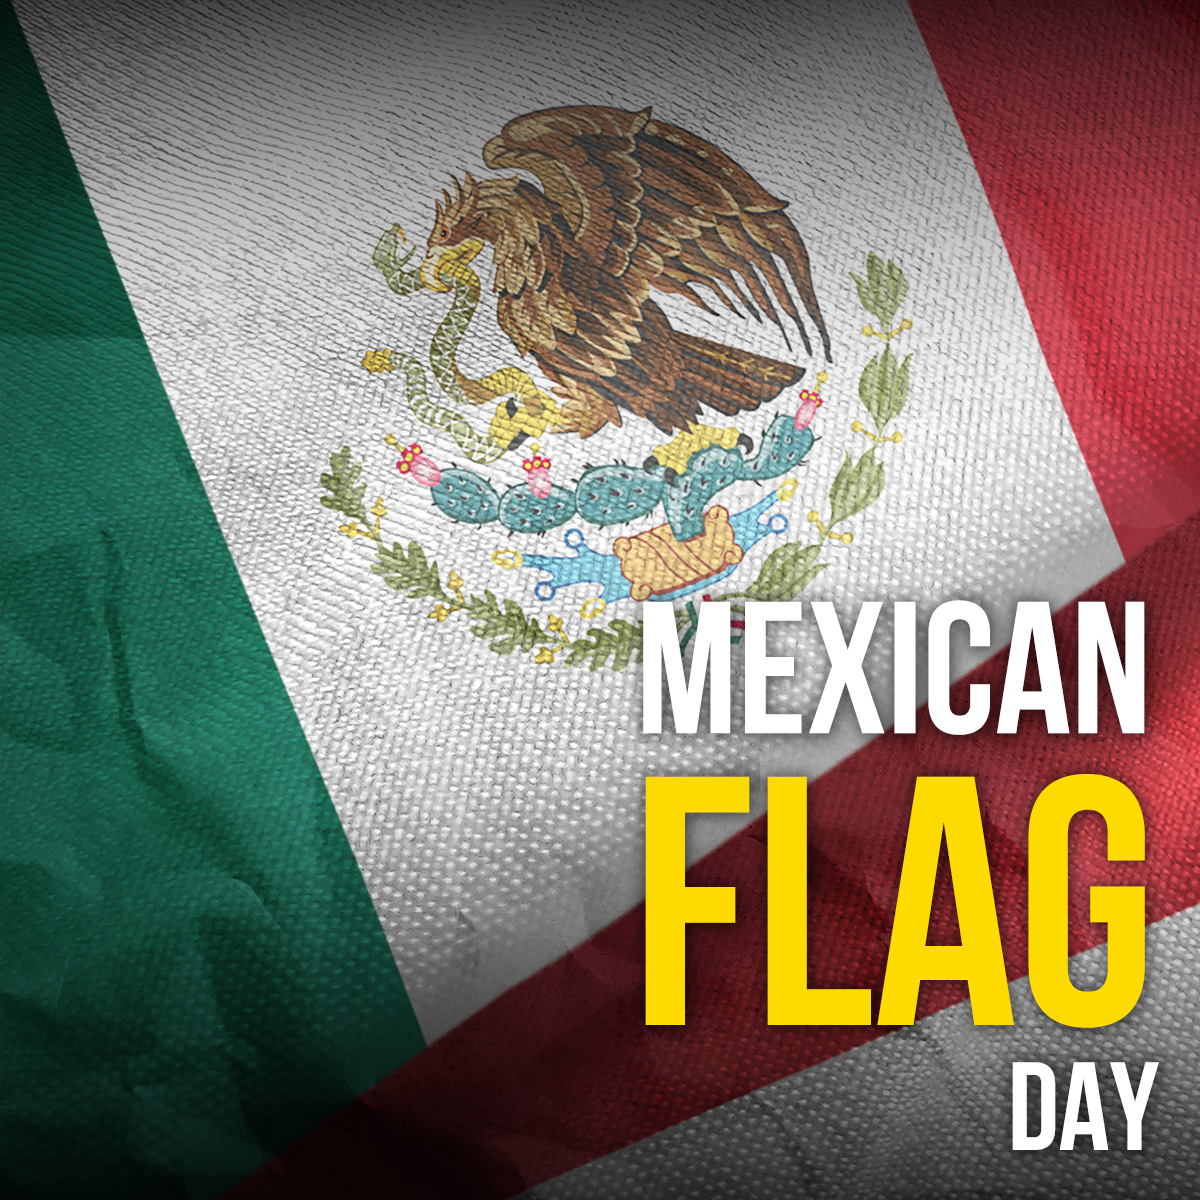 Celebrating Mexican Flag Day is one of many Mexican traditions and a way to demonstrate patriotism and love for our country. The flag is raised everywhere by government offices, businesses, and citizens all over Mexico.
#FlagDay #ProudToBeMexican